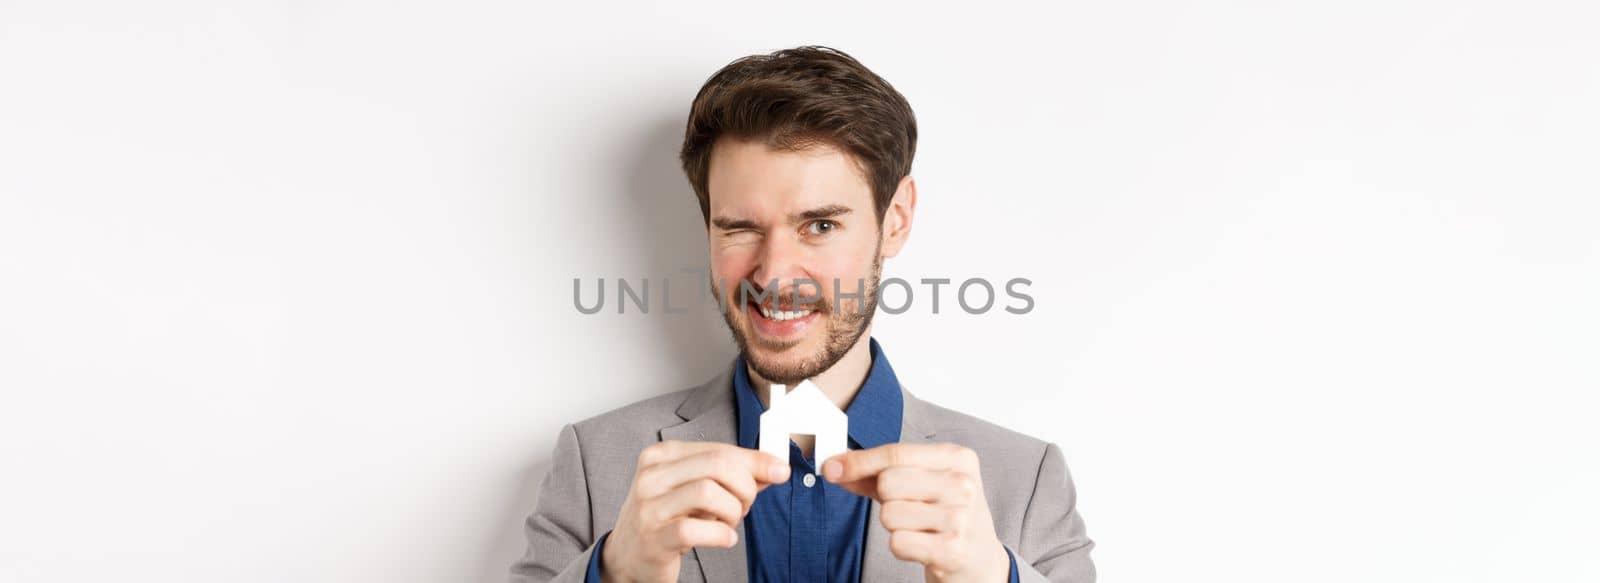 Real estate and insurance concept. Handsome man in suit winking and smiling, showing small paper house cutout, standing on white background.